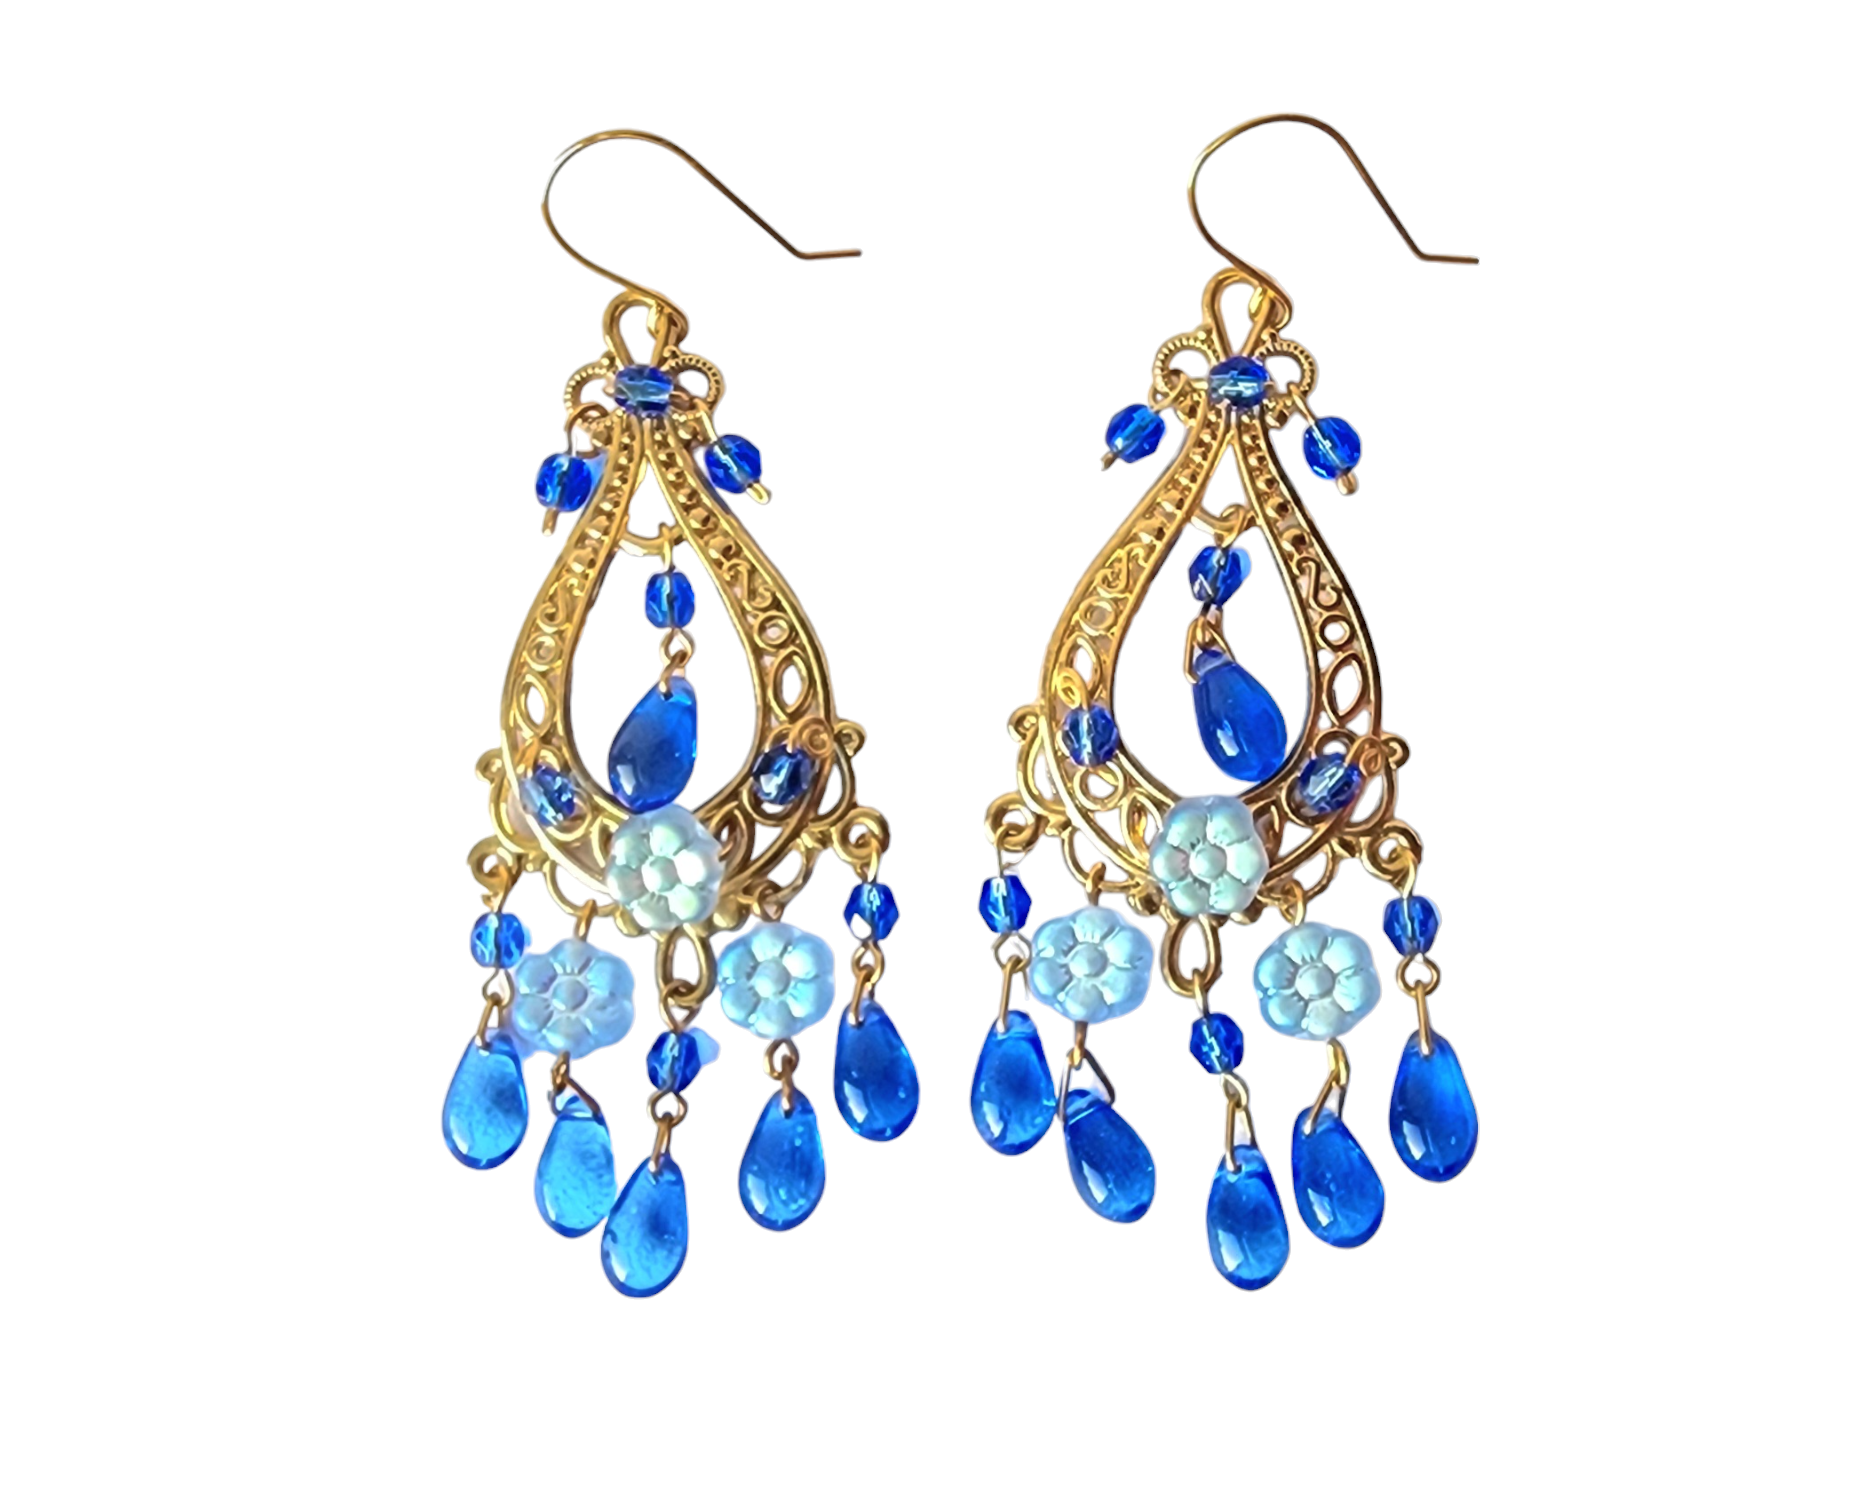 Long Eco Blue Floral Chandelier Earrings, large gold design with sapphire blue glass dangles and lighter blue flowers, on French style earrings wires. 